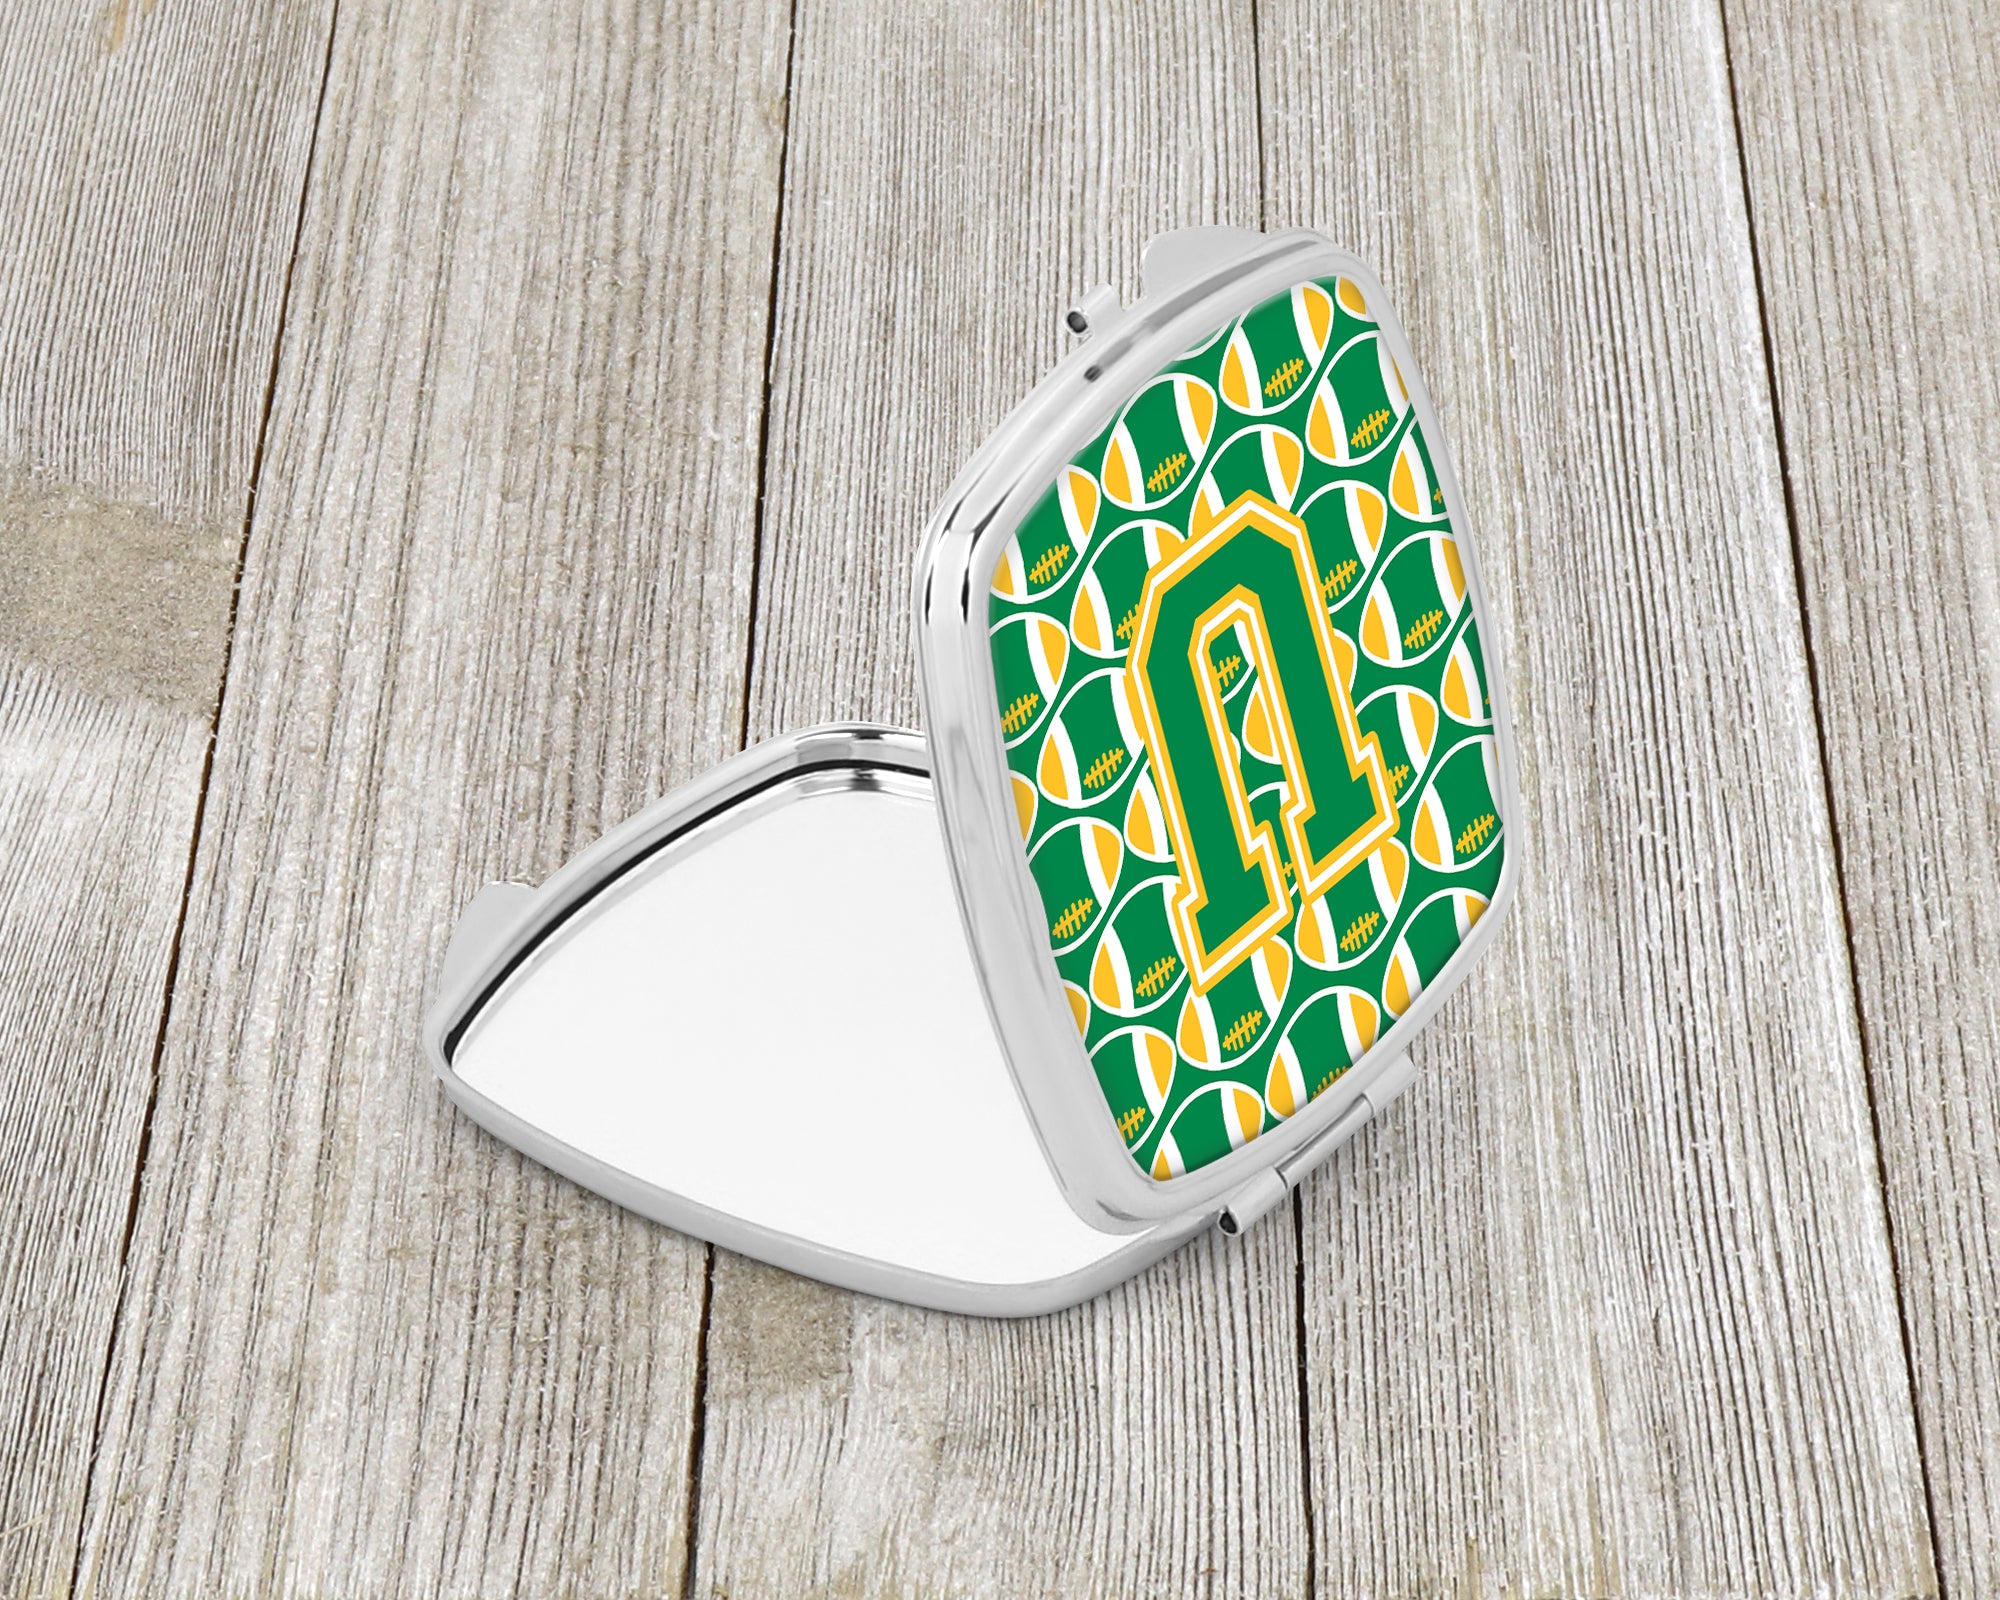 Letter U Football Green and Gold Compact Mirror CJ1069-USCM  the-store.com.